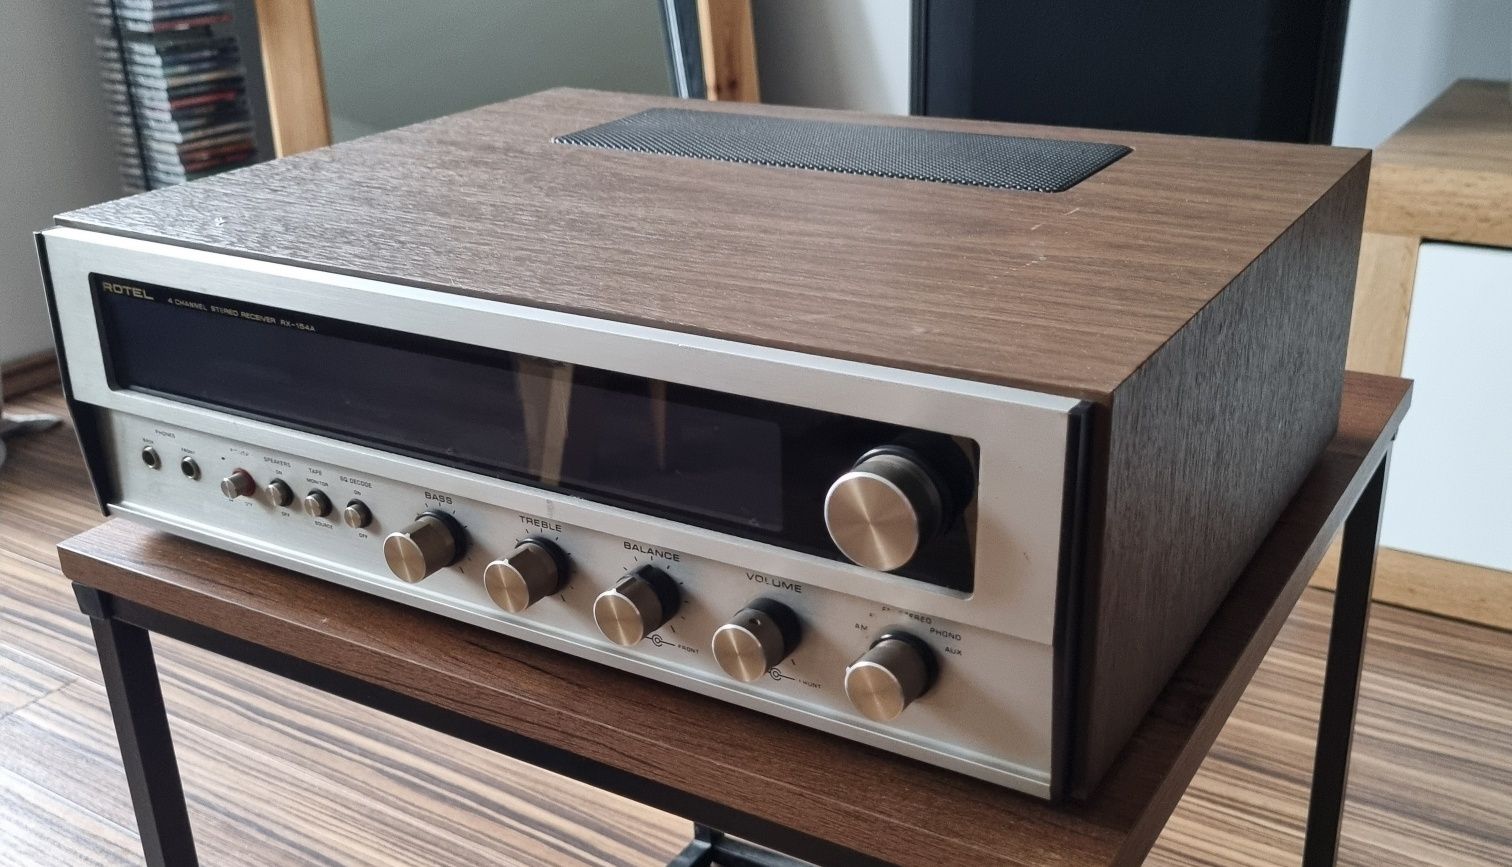 Rotel RX 154A Amplituner stereo 1972r Vintage